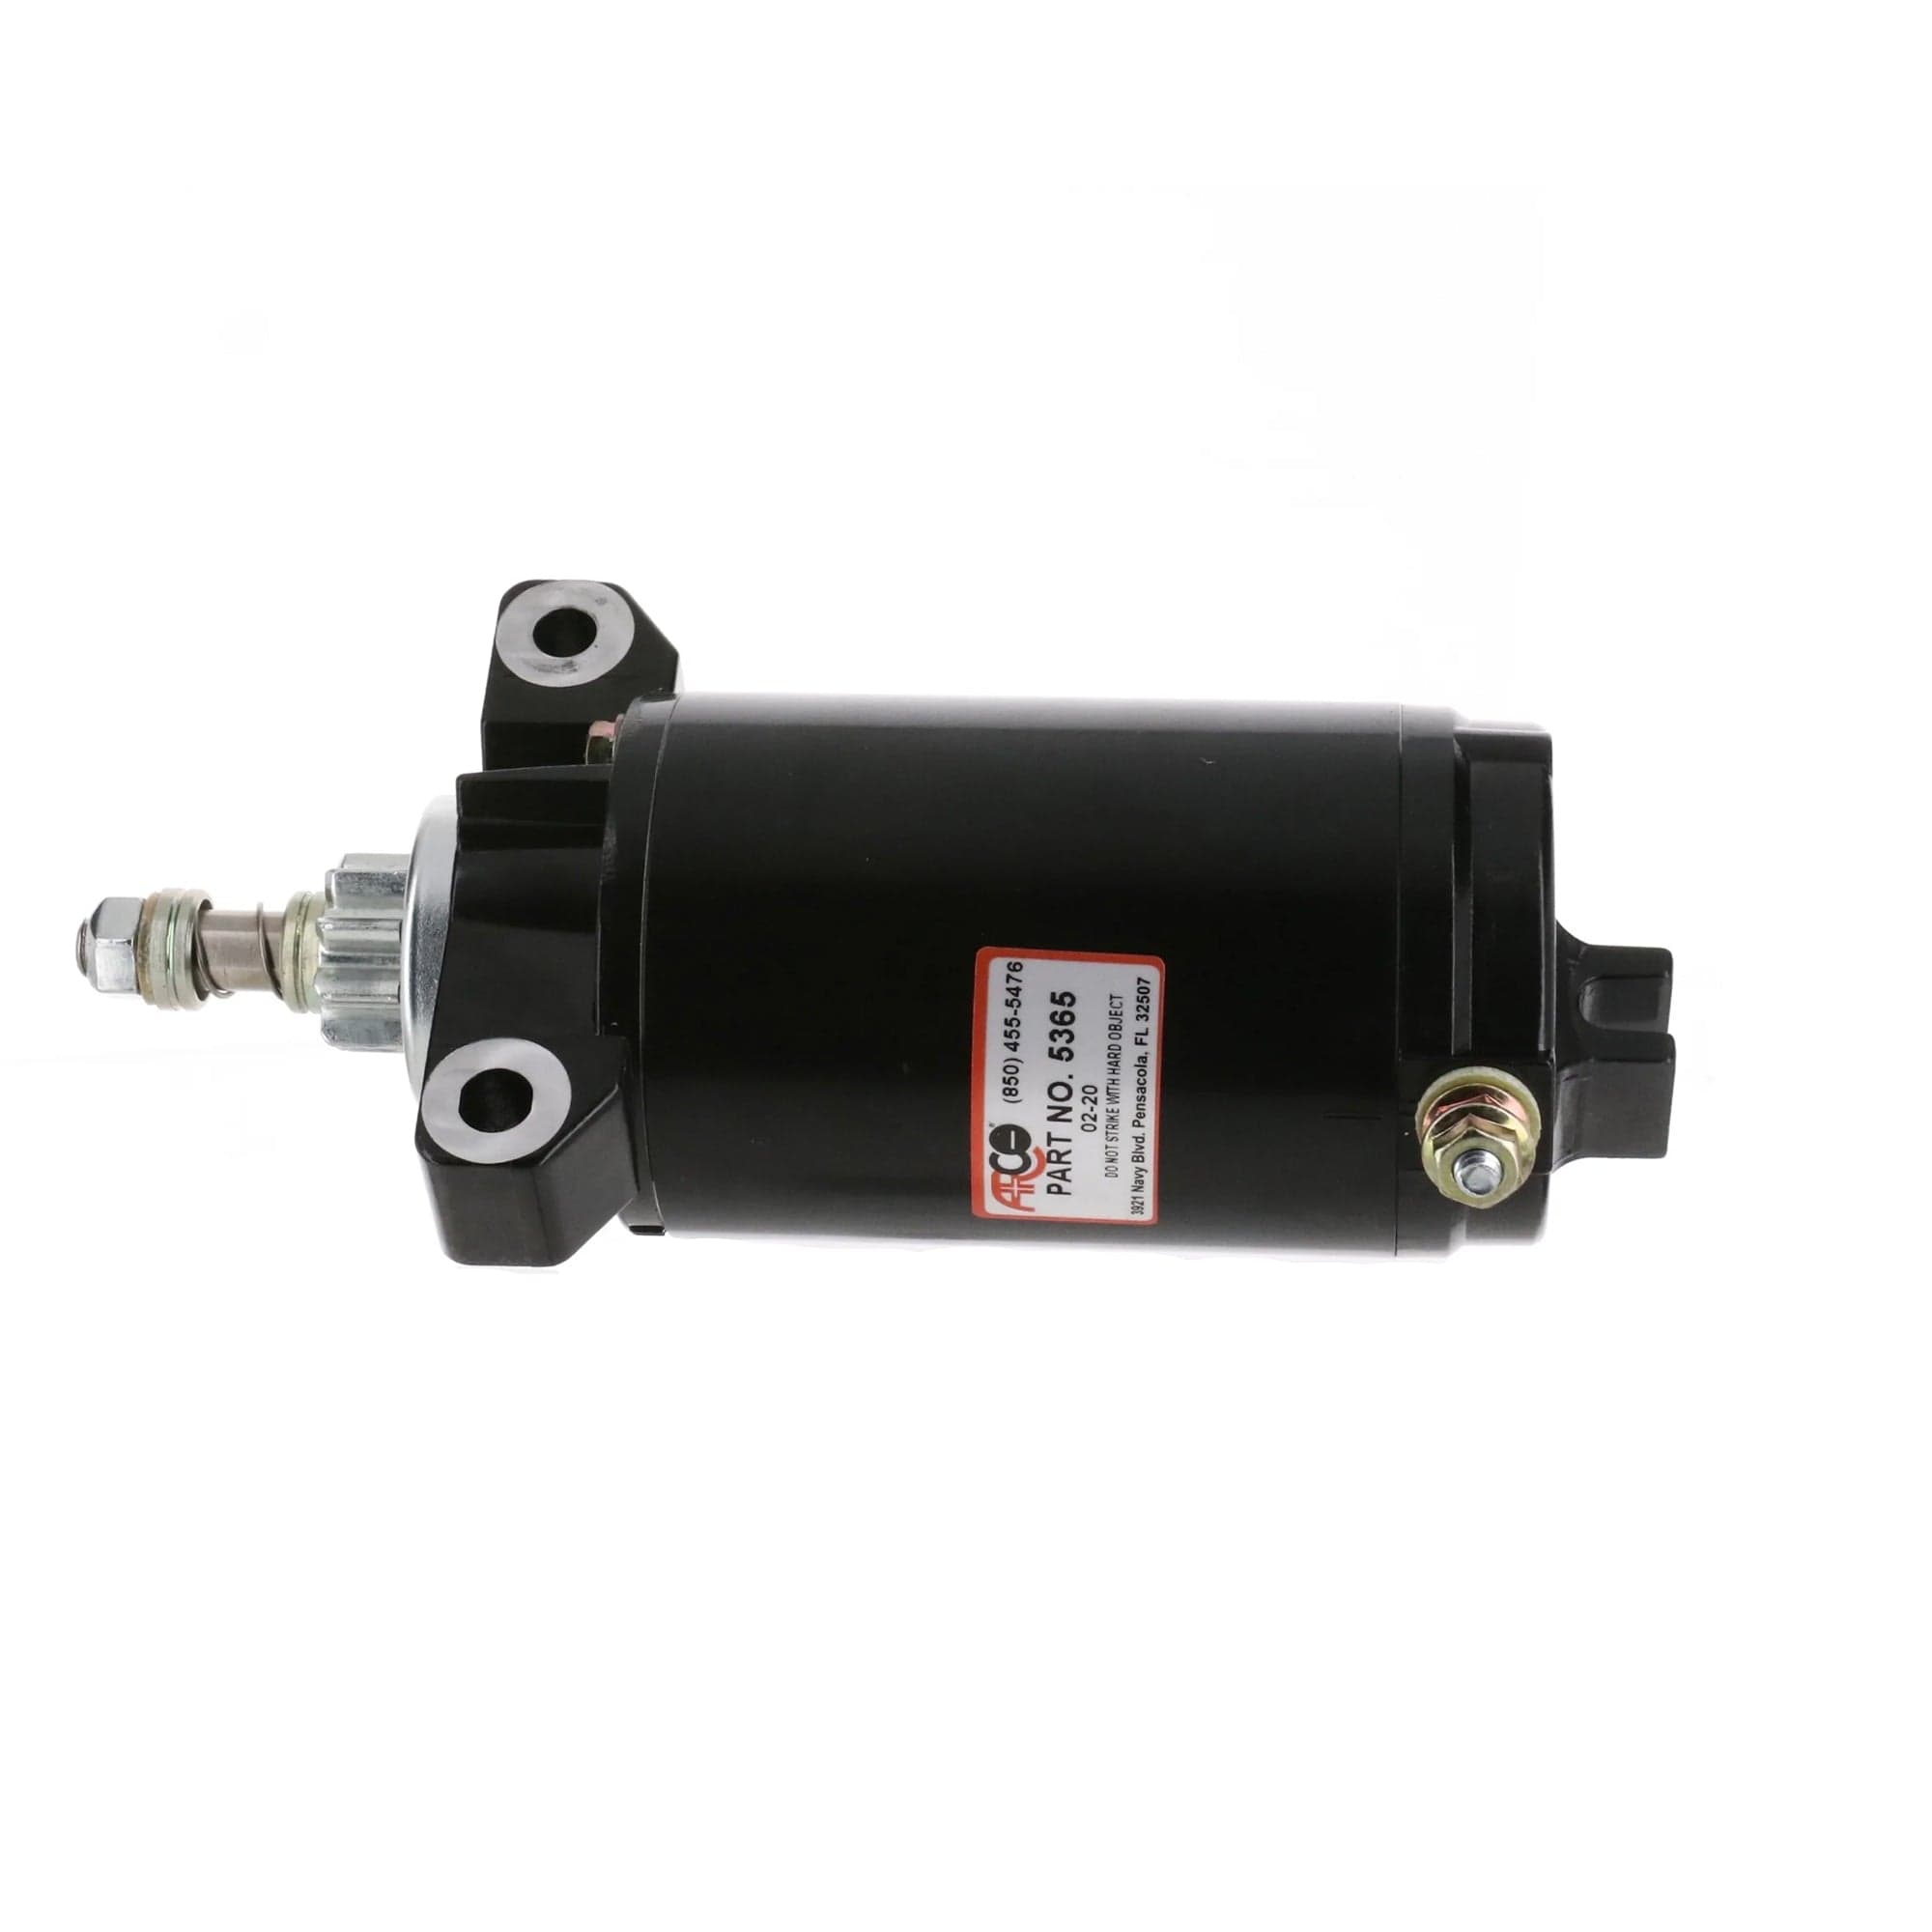 ARCO NEW Original Equipment Quality Replacement Outboard Starter for Yamaha and Mercury - 67C-81800, 893887T, 888160T, 884045T, 859170T